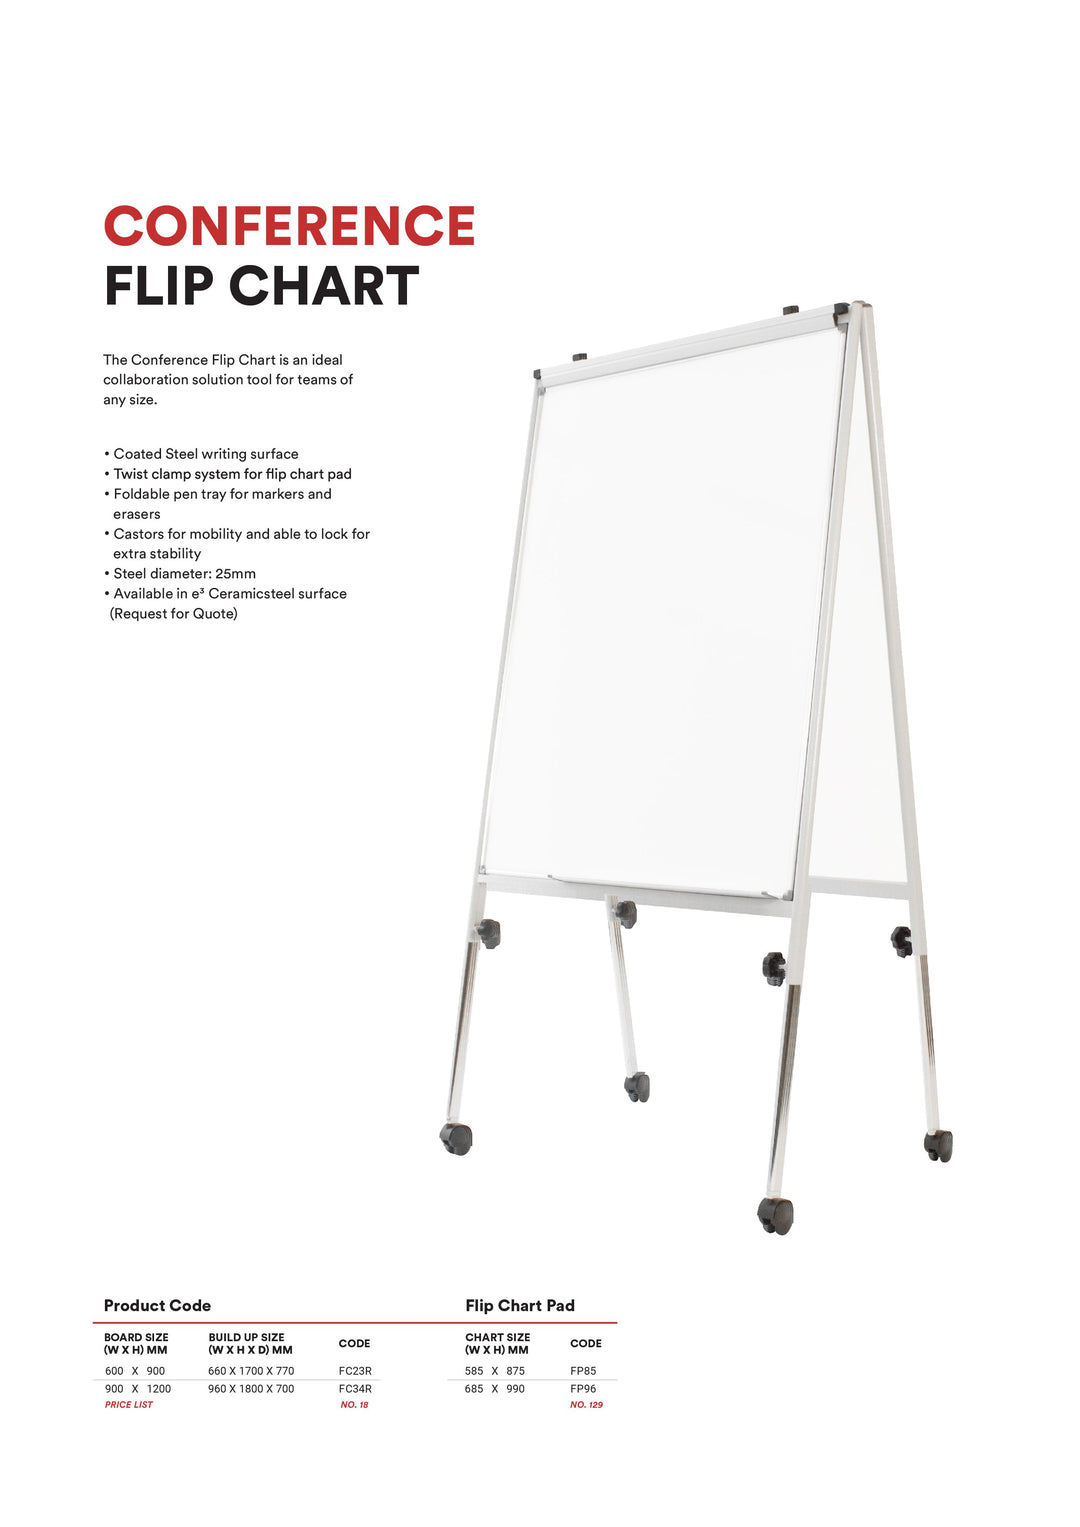 CONFERENCE Mobile Flip Chart (Magnetic)